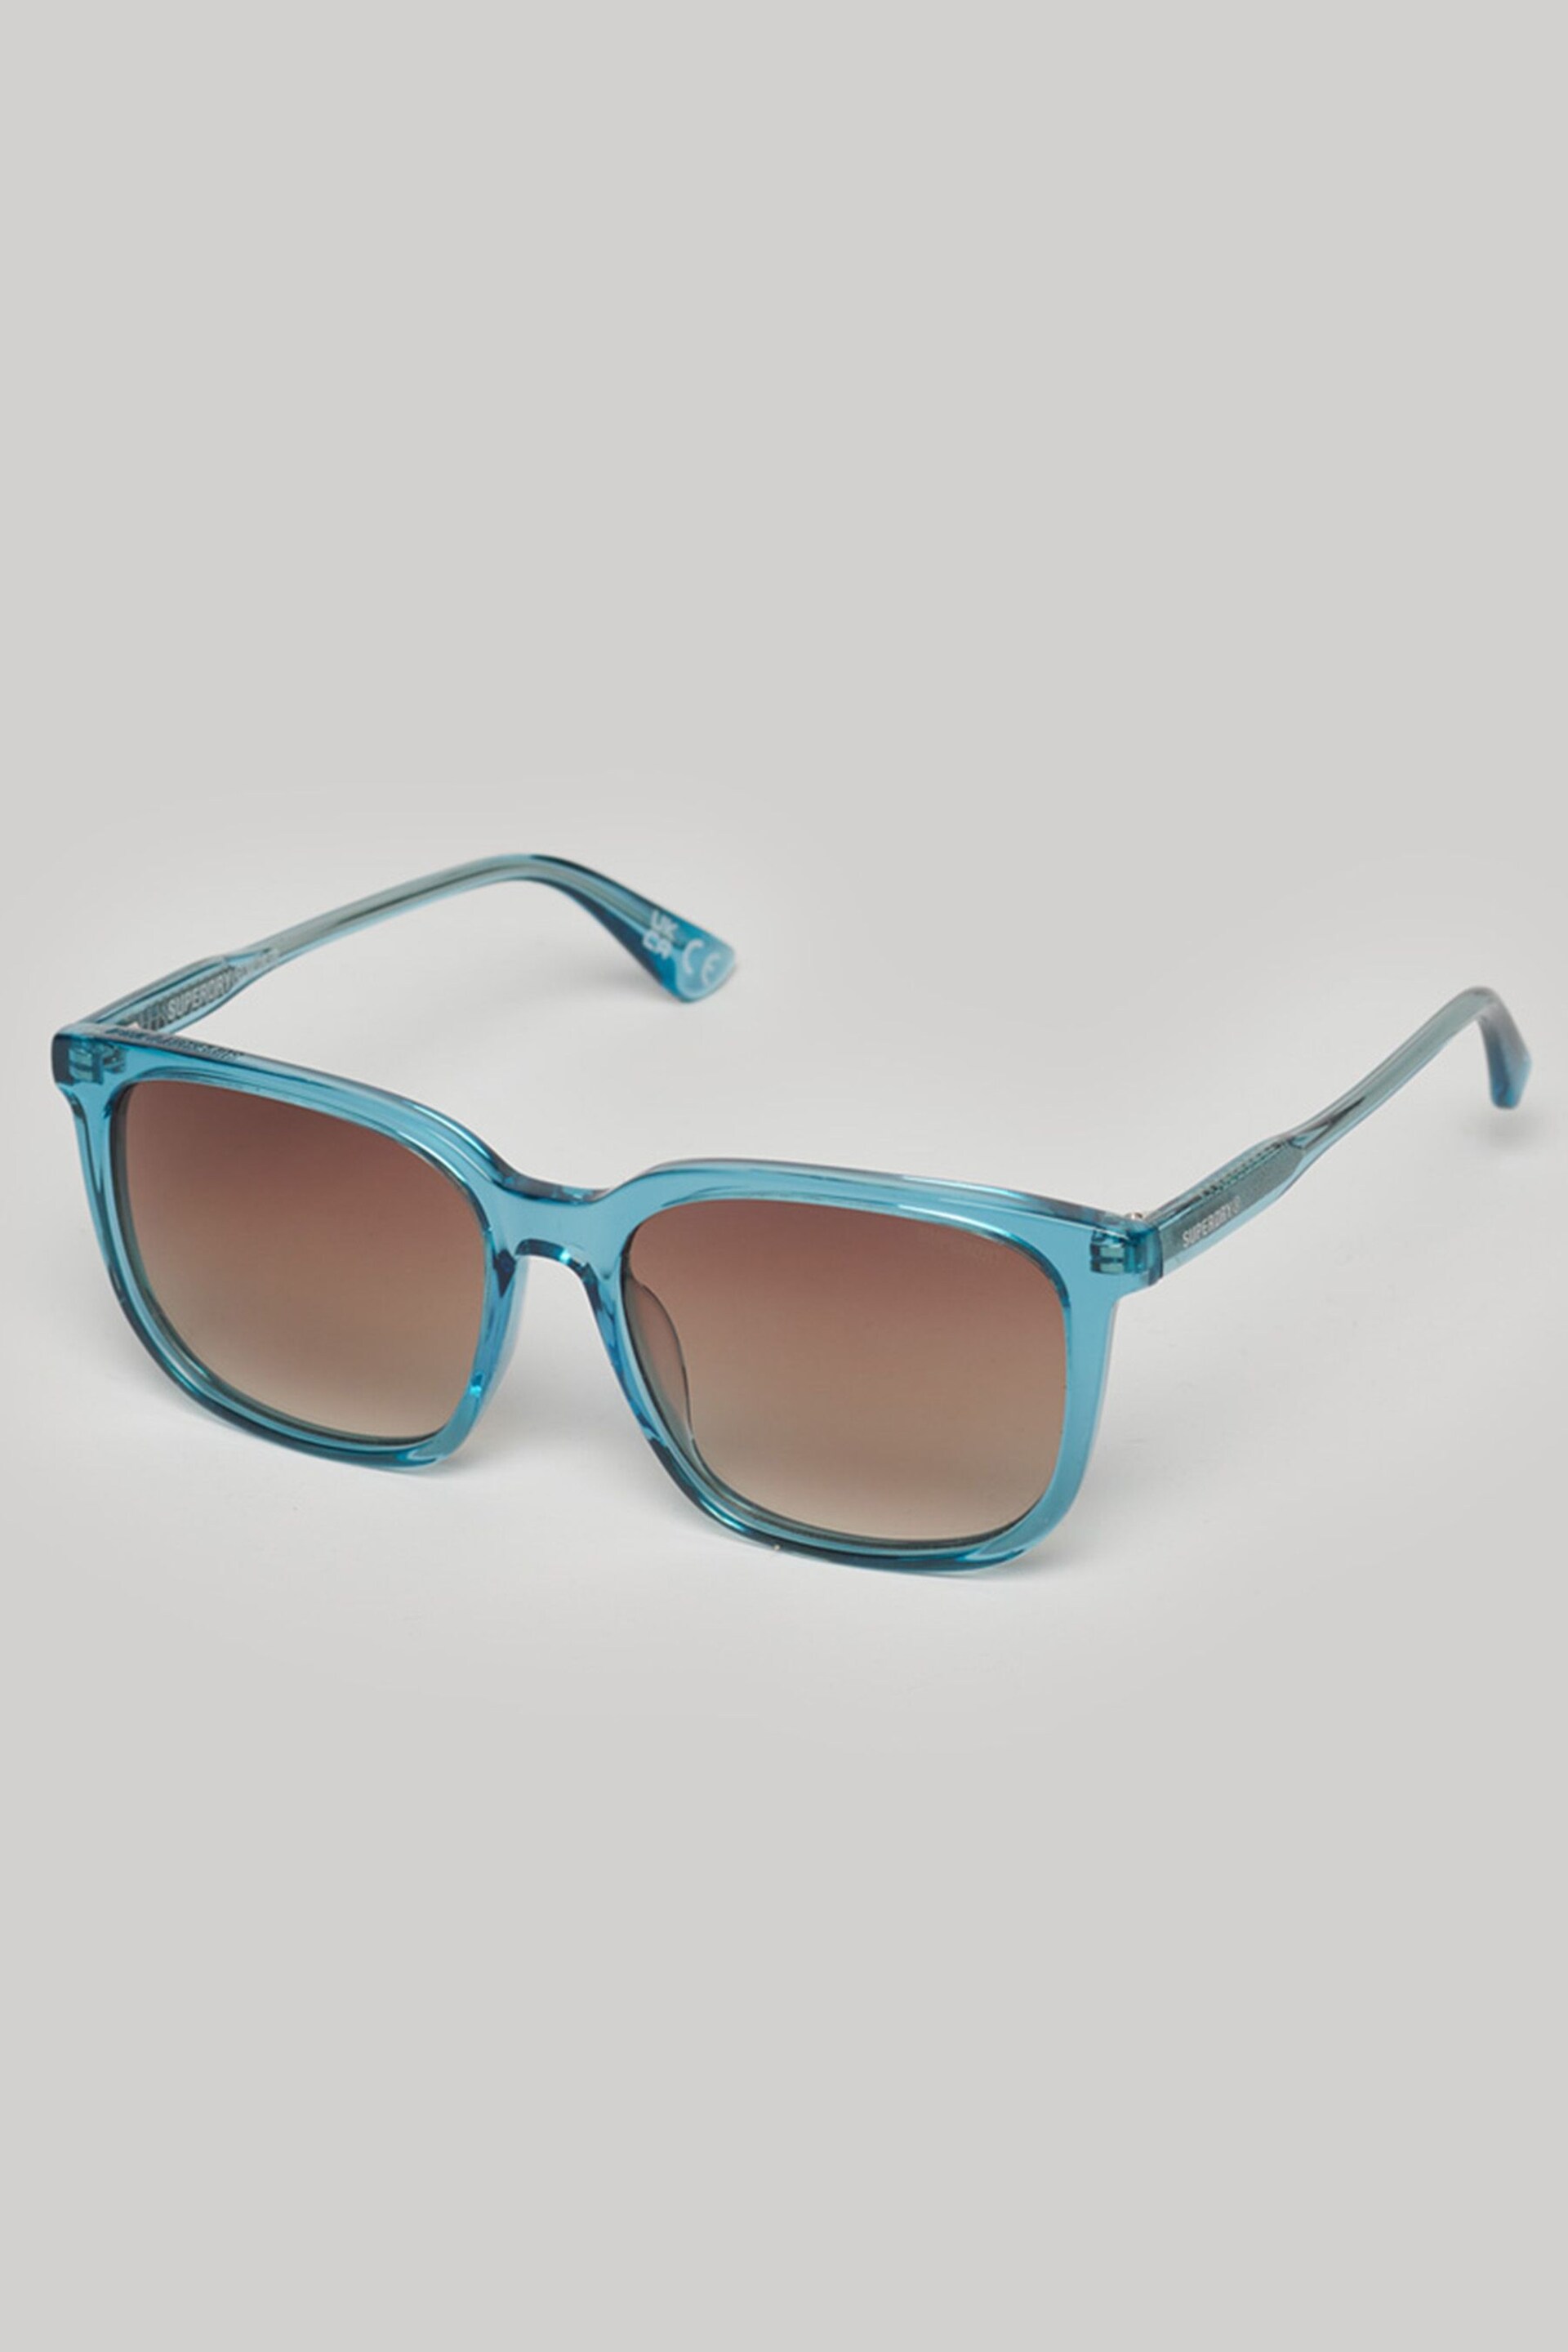 Superdry Blue SDR Sorcha Sunglasses - Image 2 of 4